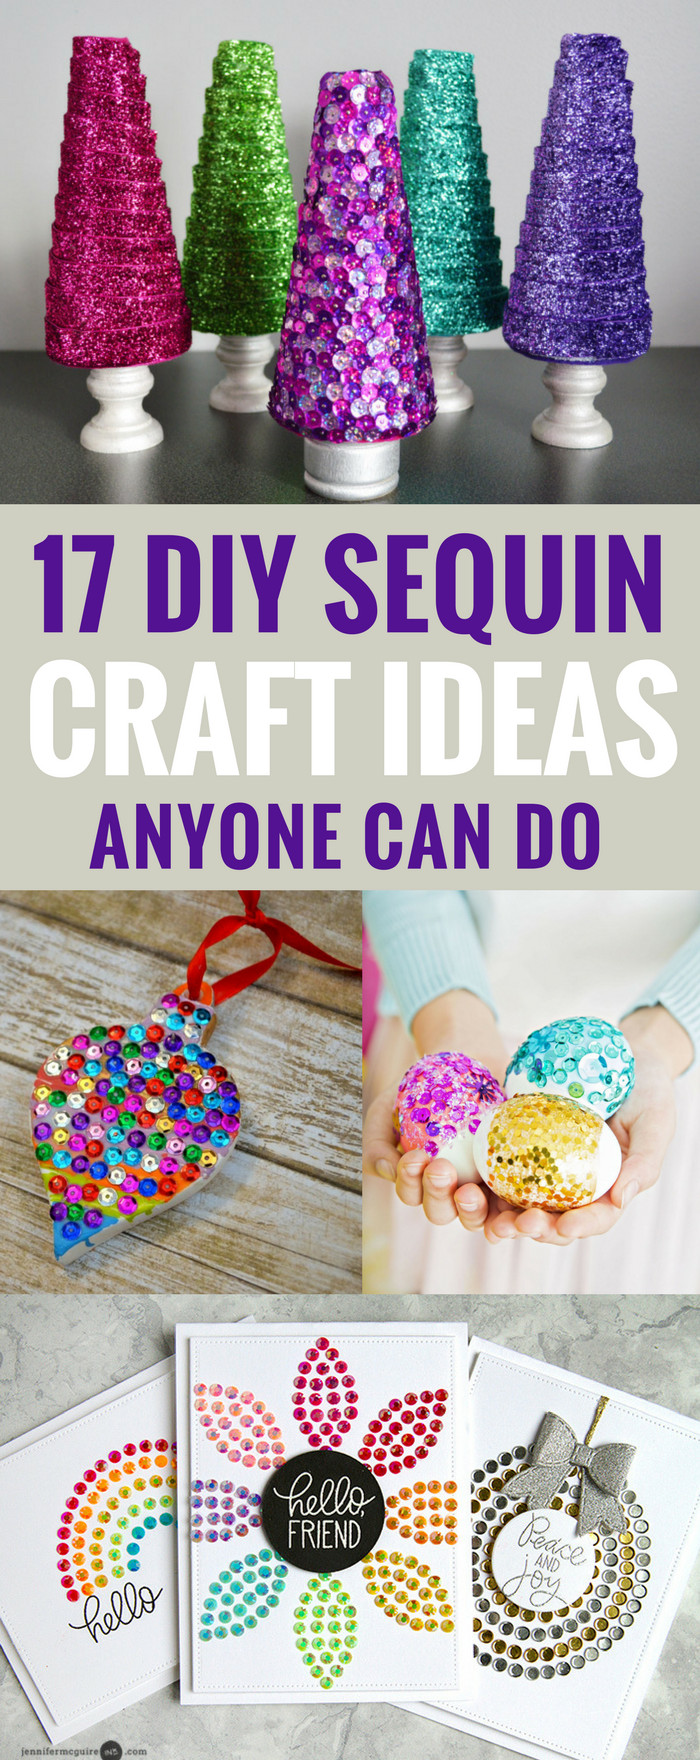 Arts And Crafts Gifts Ideas
 17 DIY Sequin Crafts Ideas Anyone Can Do